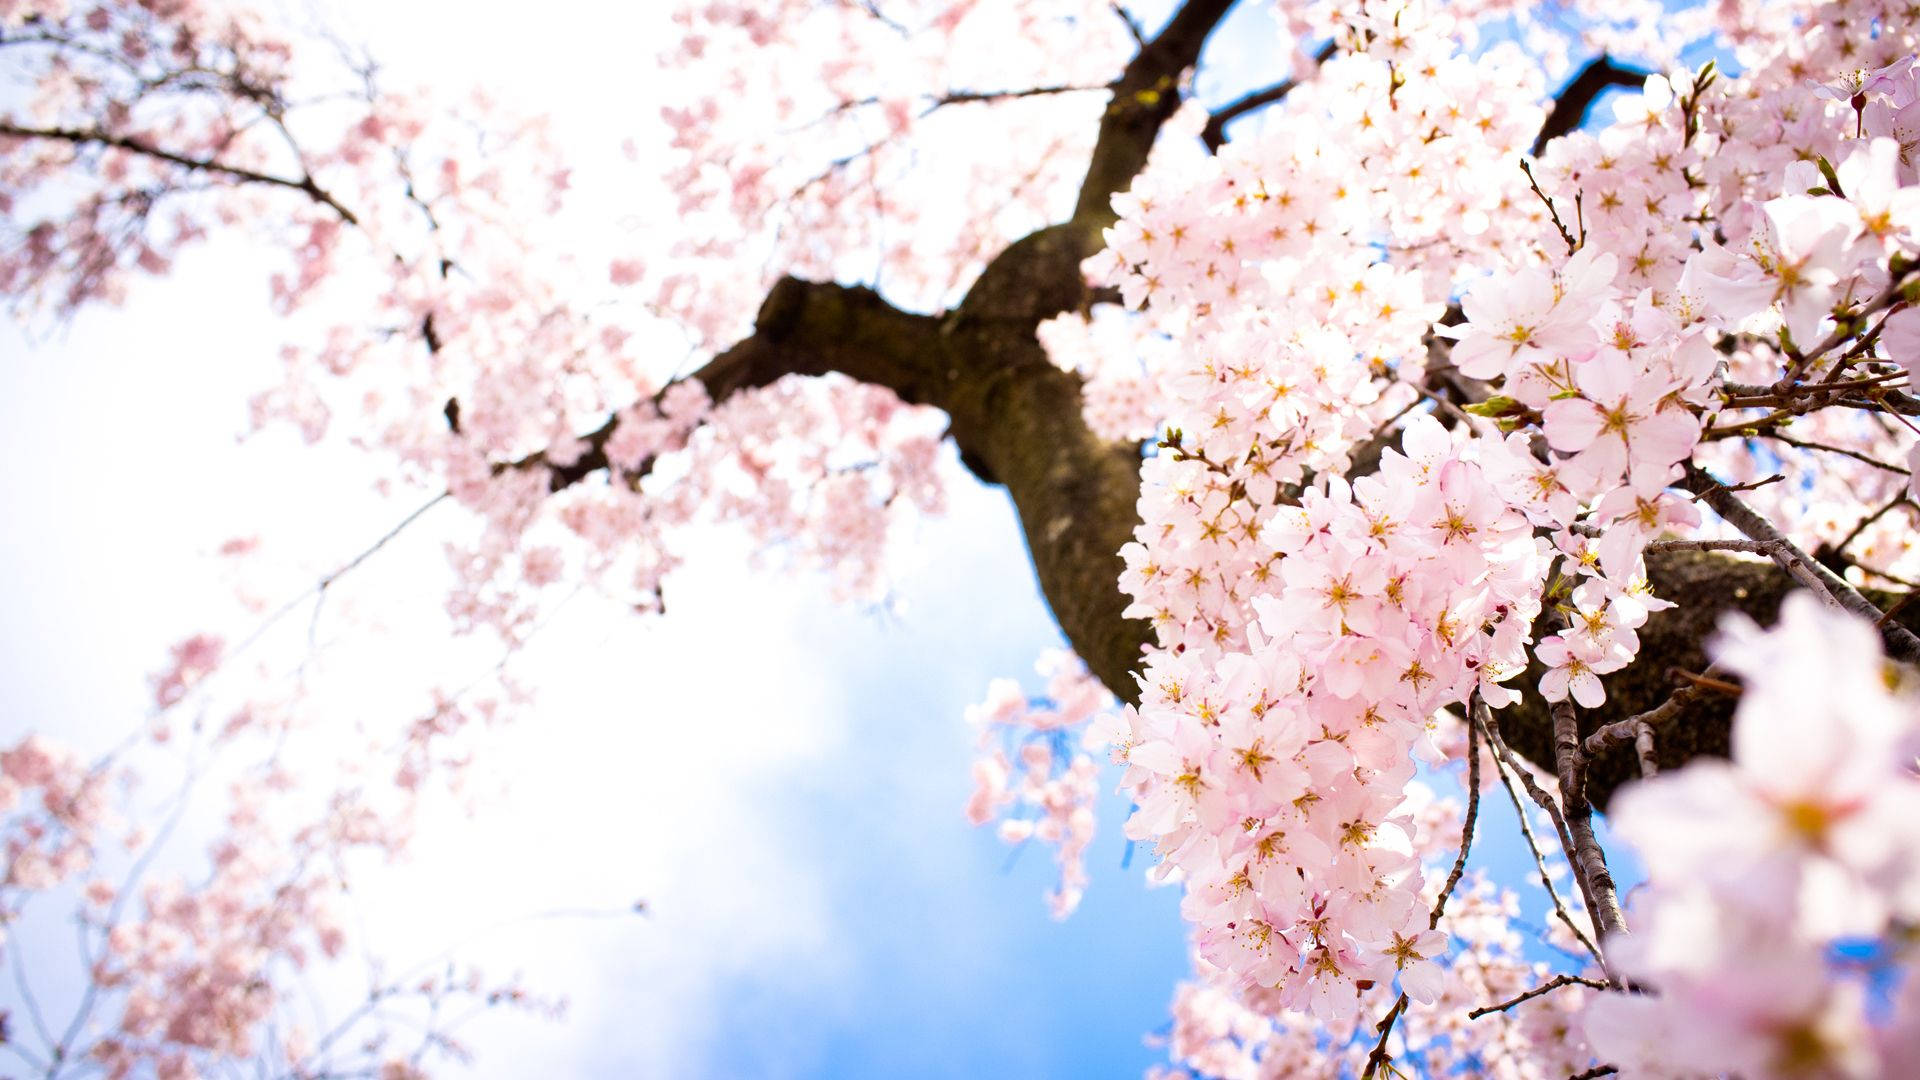 “The Beauty of Cherry Blossoms in Japan” Wallpaper